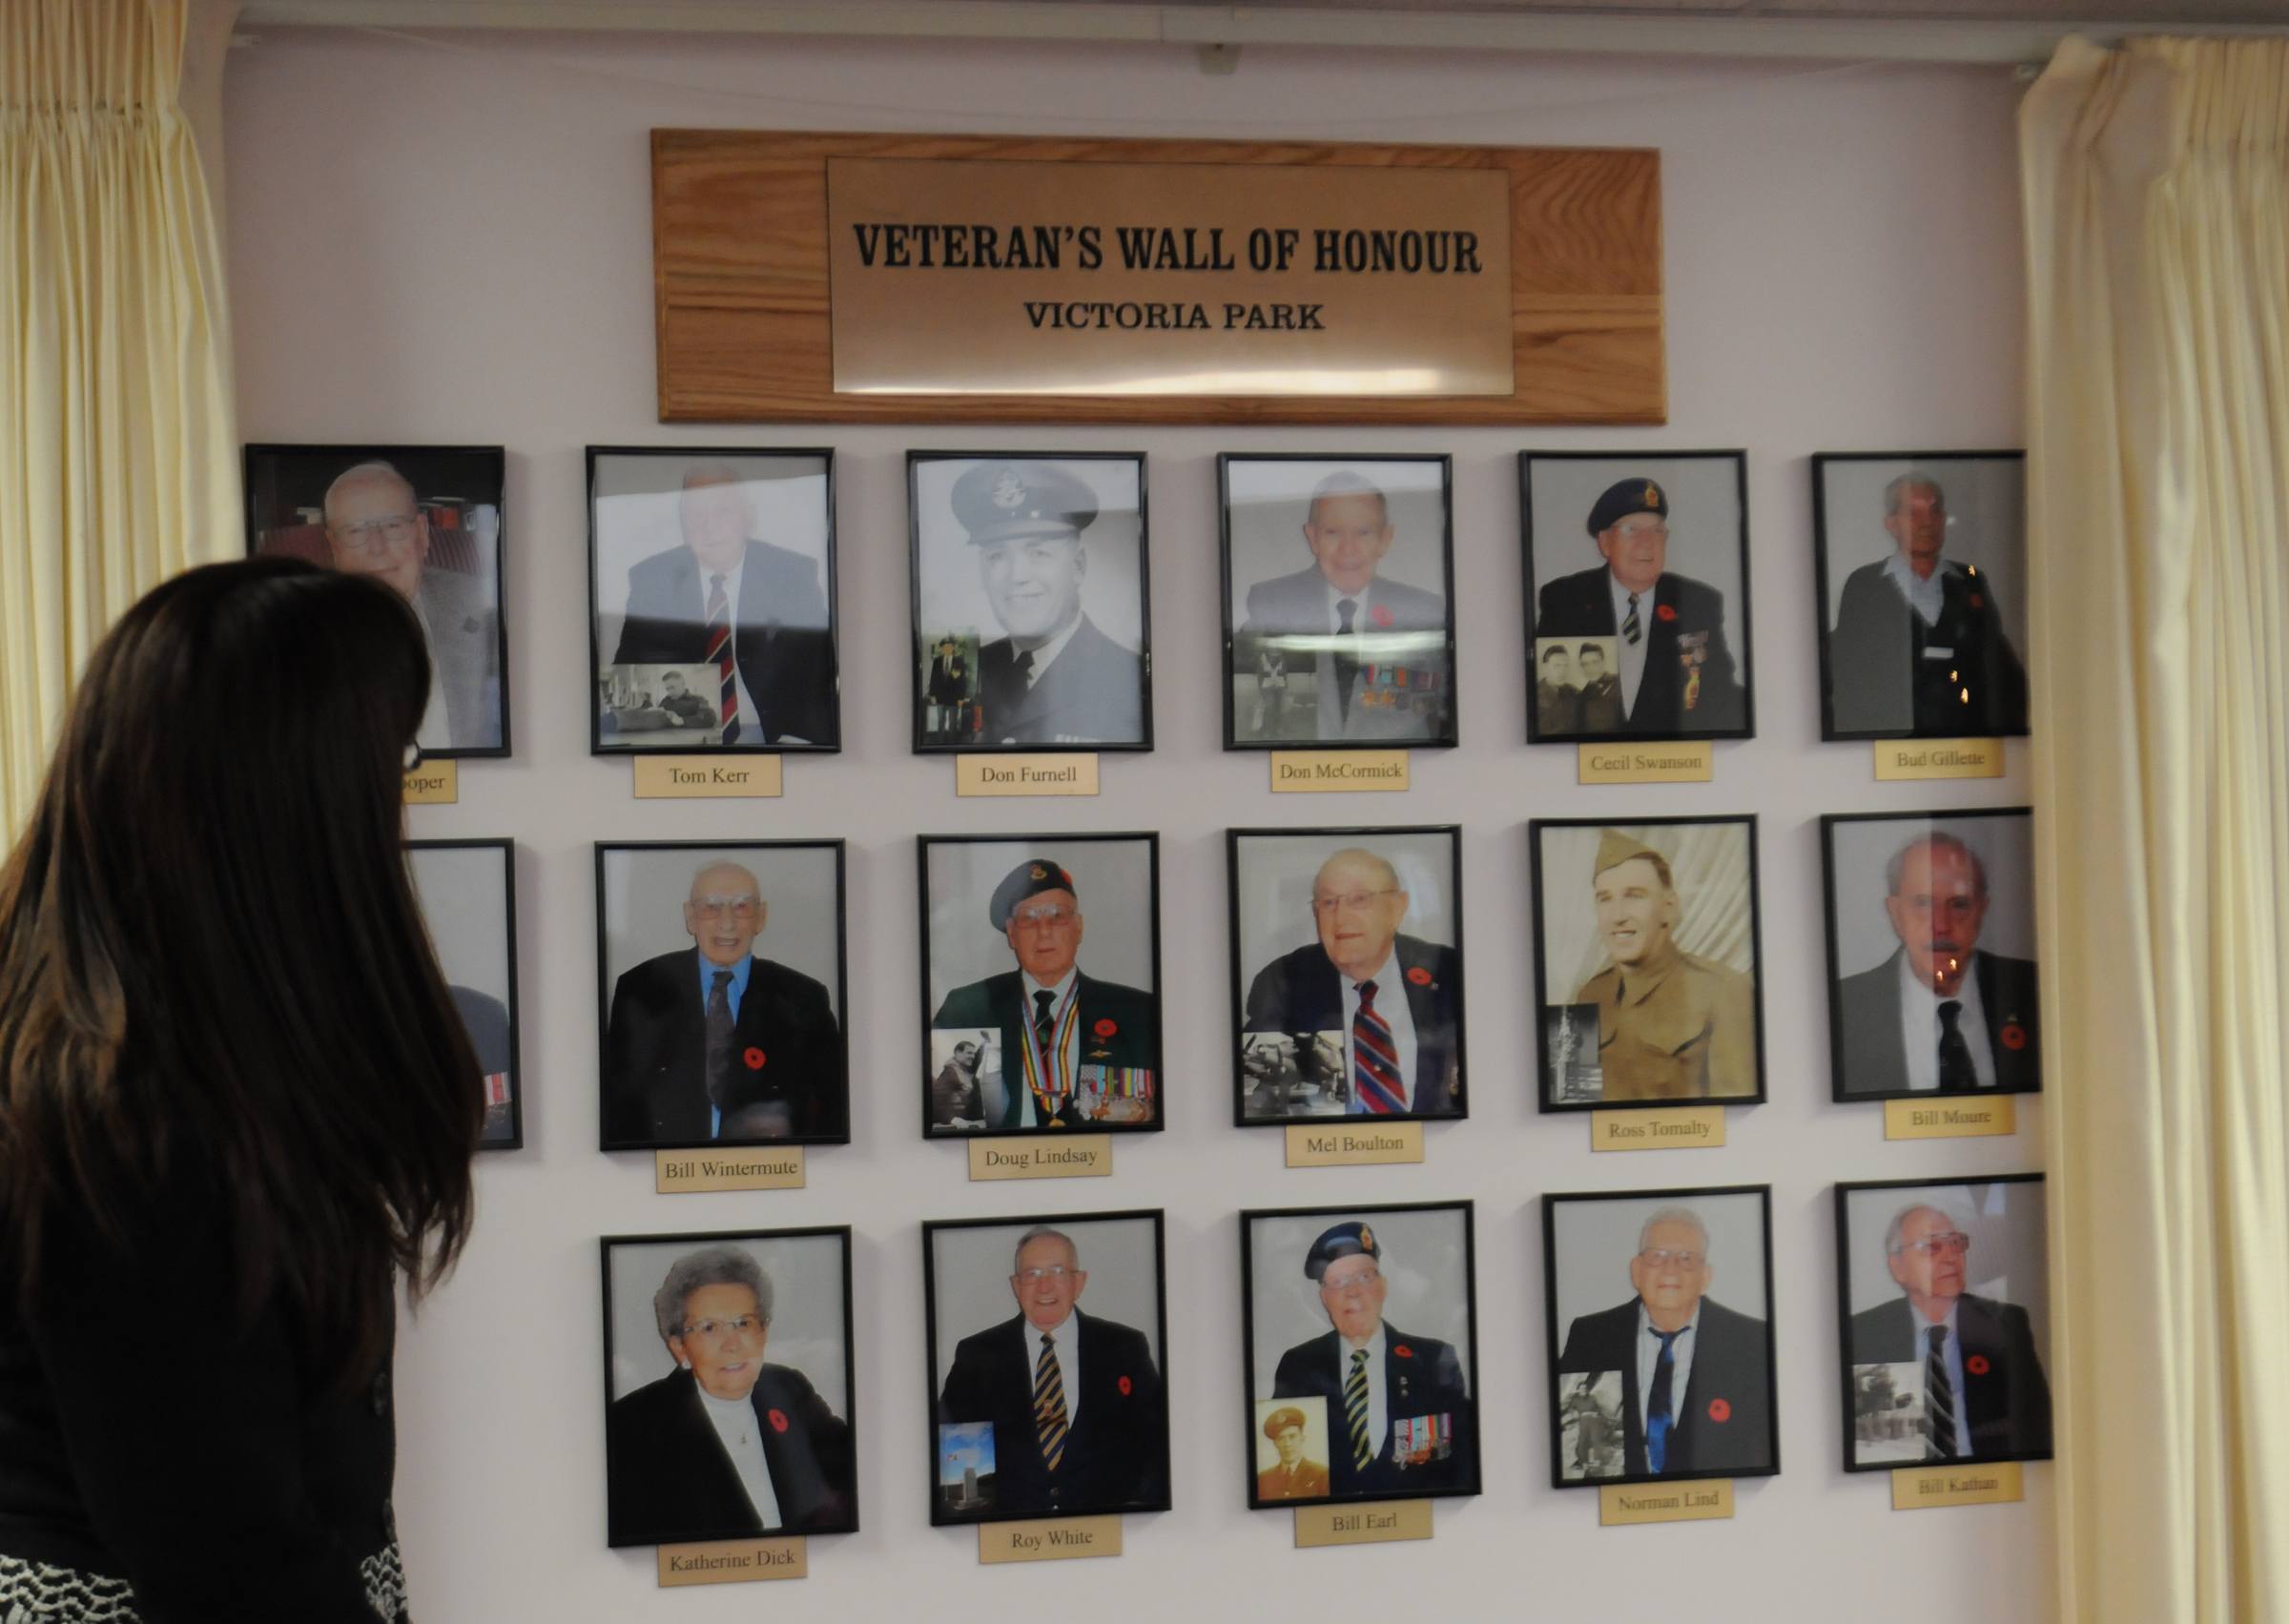 REMINDER-A new wall to honour veterans was unveiled this past week at Victoria Park in Red Deer. The wall will serve as a reminder of the soldiers who fought for our country all year long.